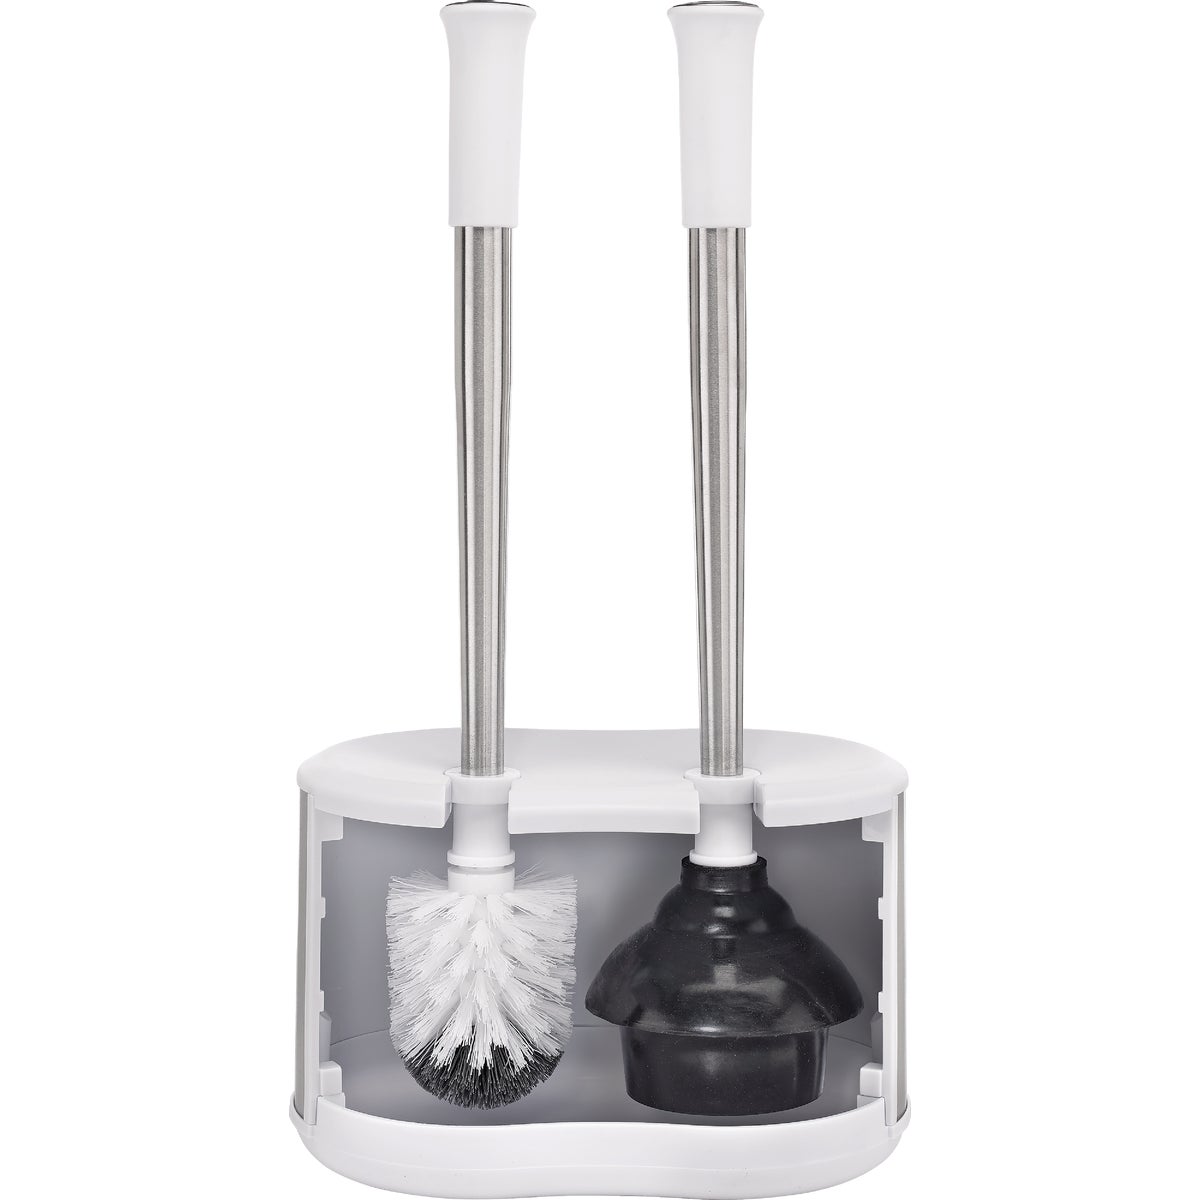 Polder Stainless Steel/White Toilet Brush and Plunger Caddy